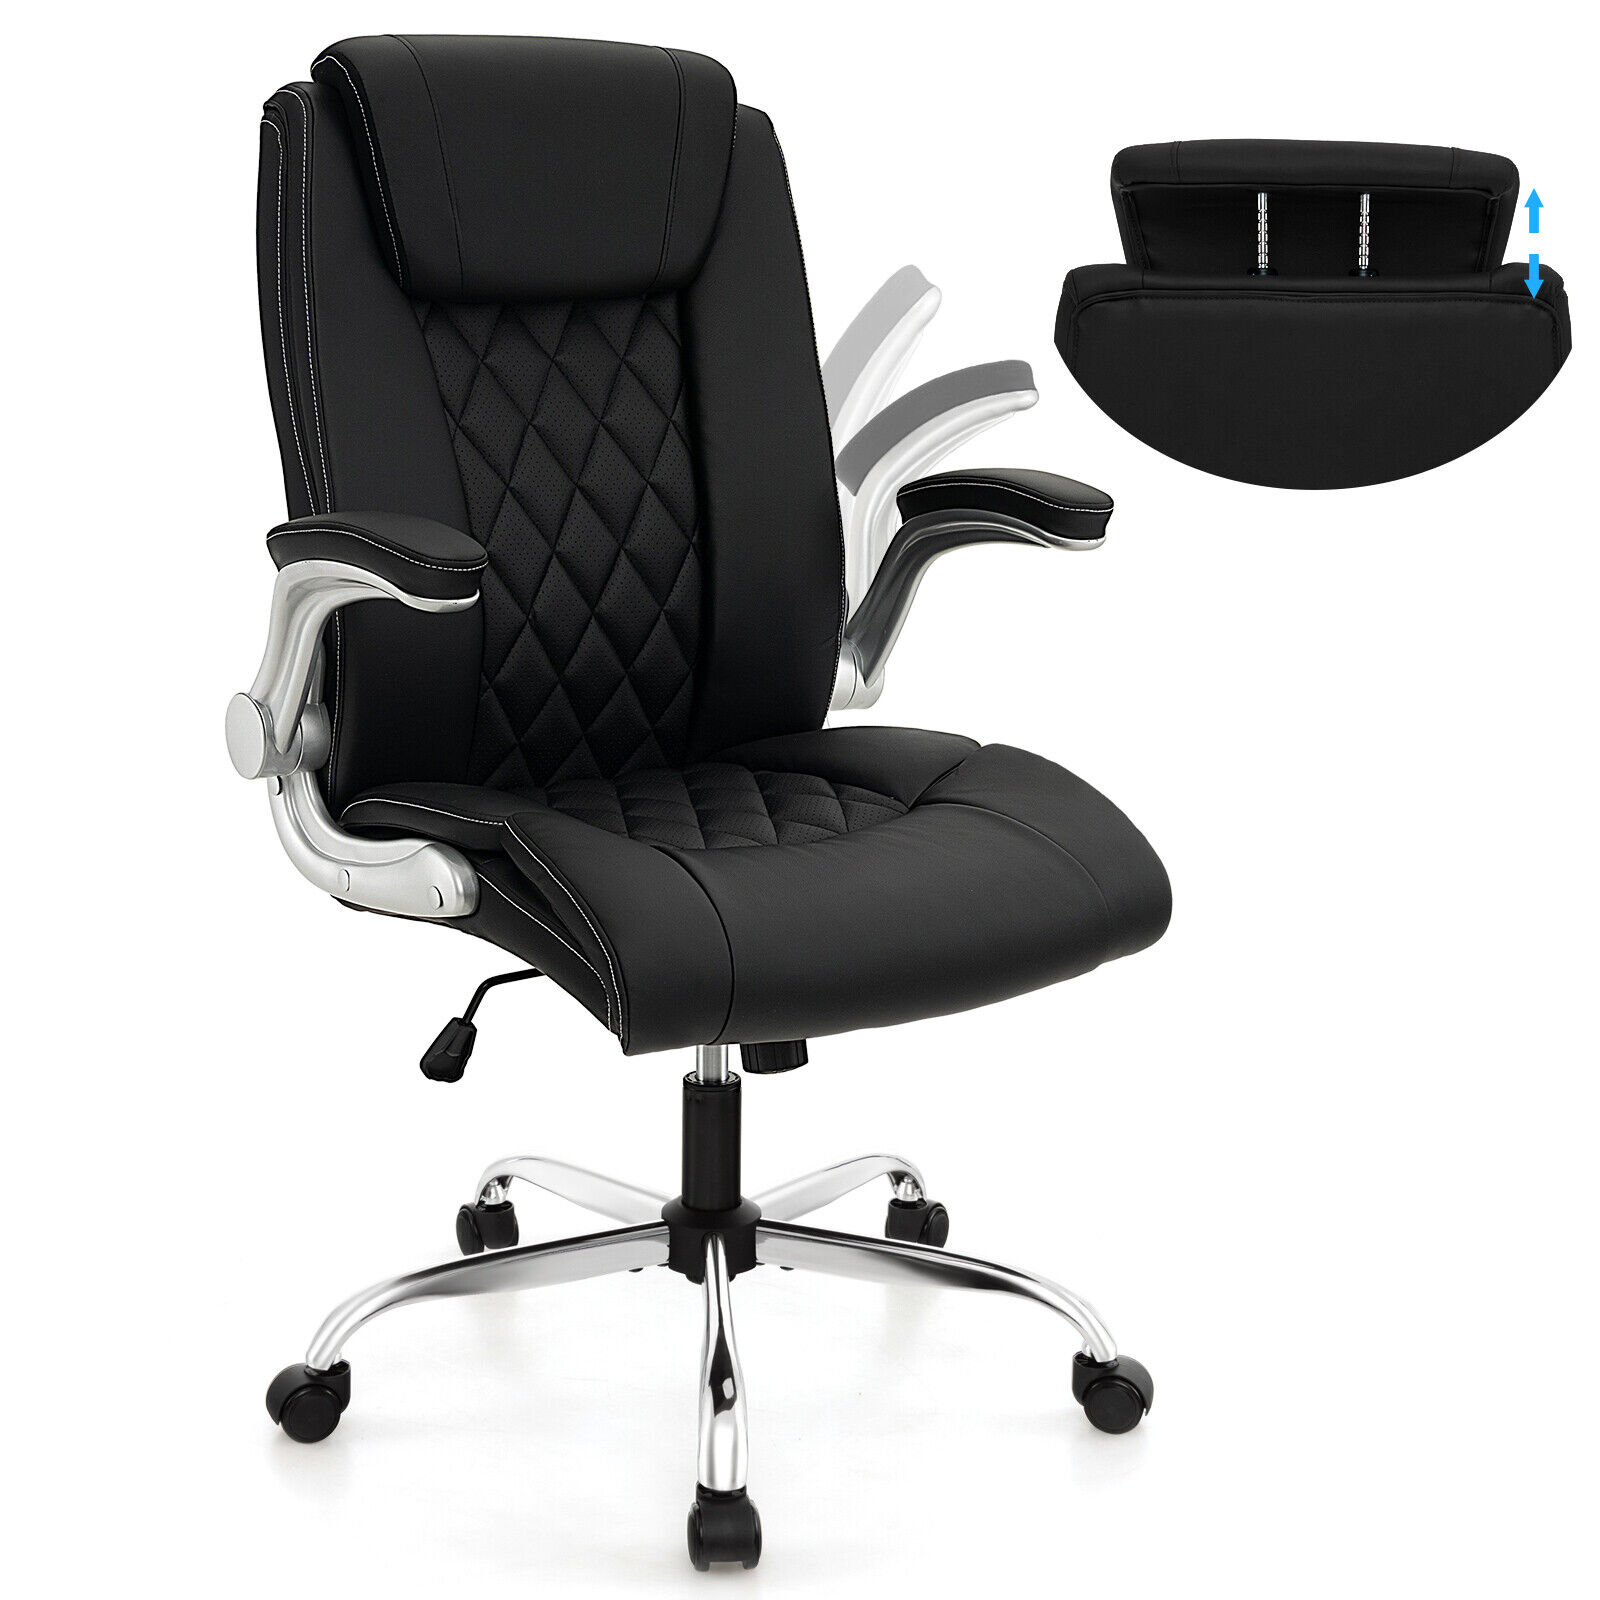 PU Leather Office Chair Height Adjustable Executive Chair w/Adjustable Headrest